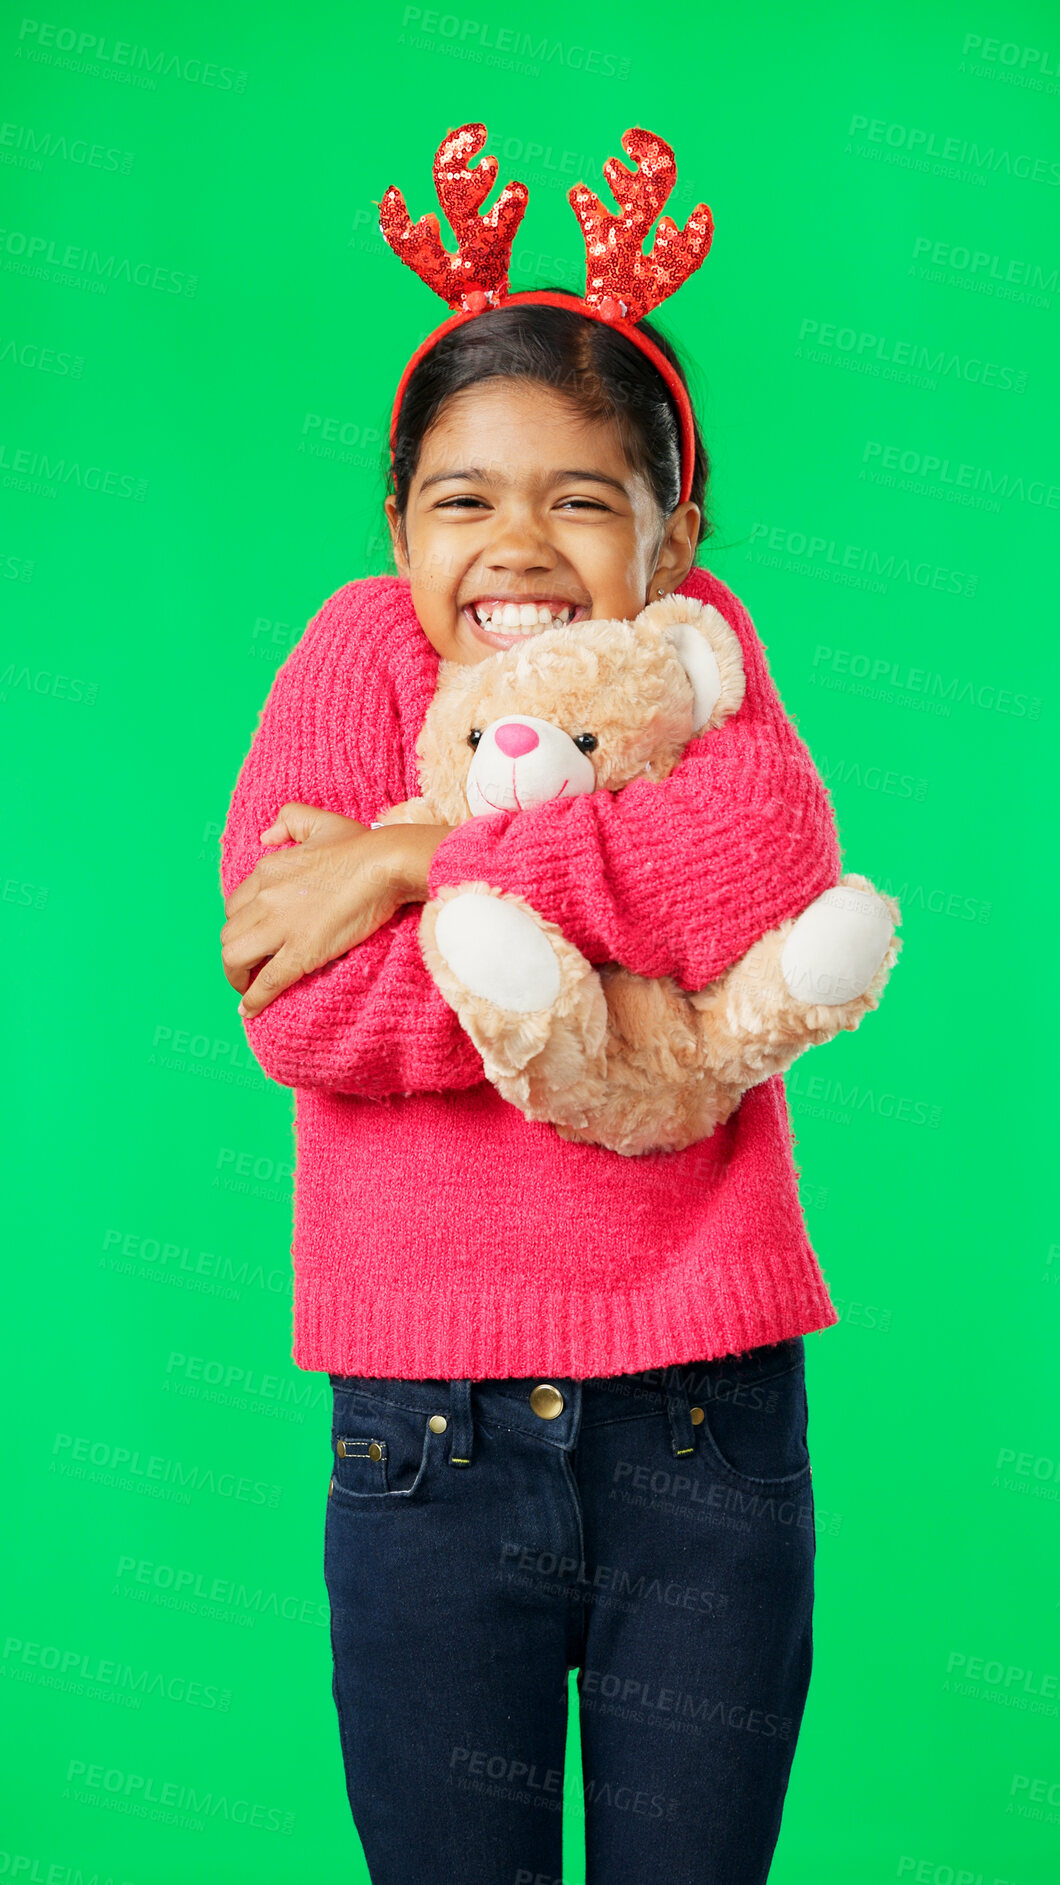 Buy stock photo Christmas teddy bear, green screen portrait and happy child excited for festive holiday, celebration or present. Happiness, gift and young girl, youth or kid hug stuffed animal on studio background